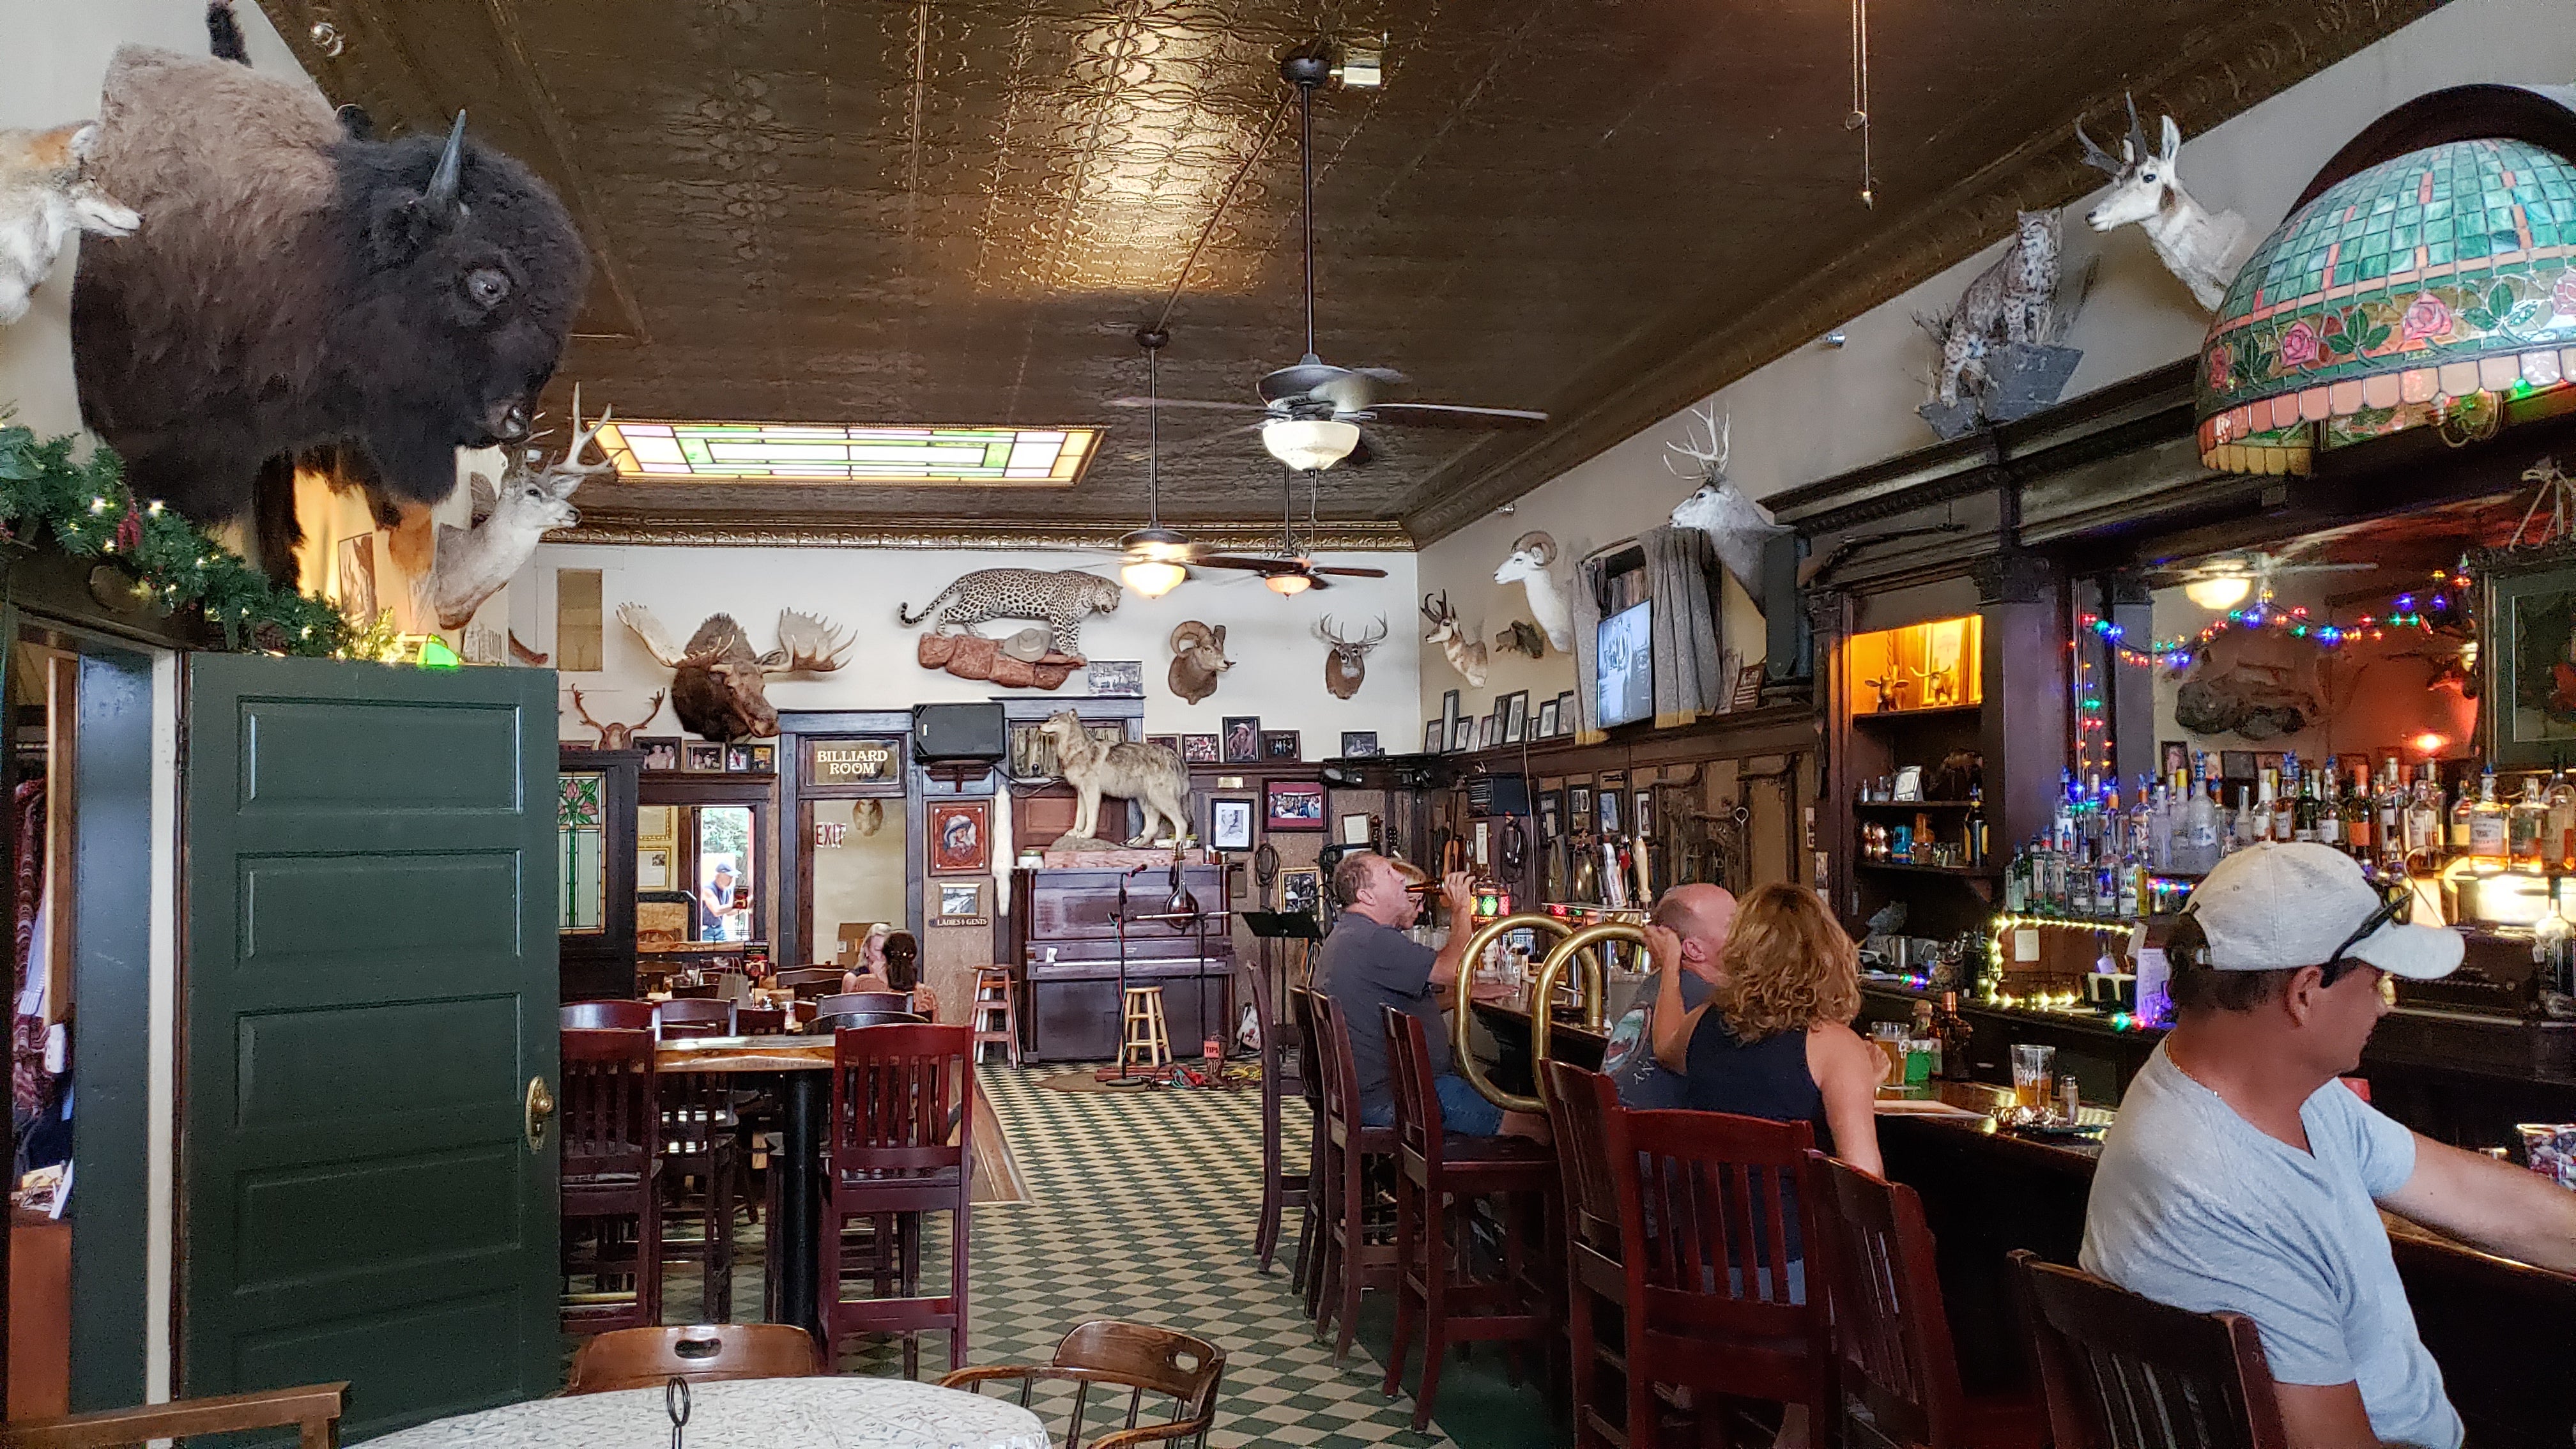 Inside the Occidental Hotel’s saloon